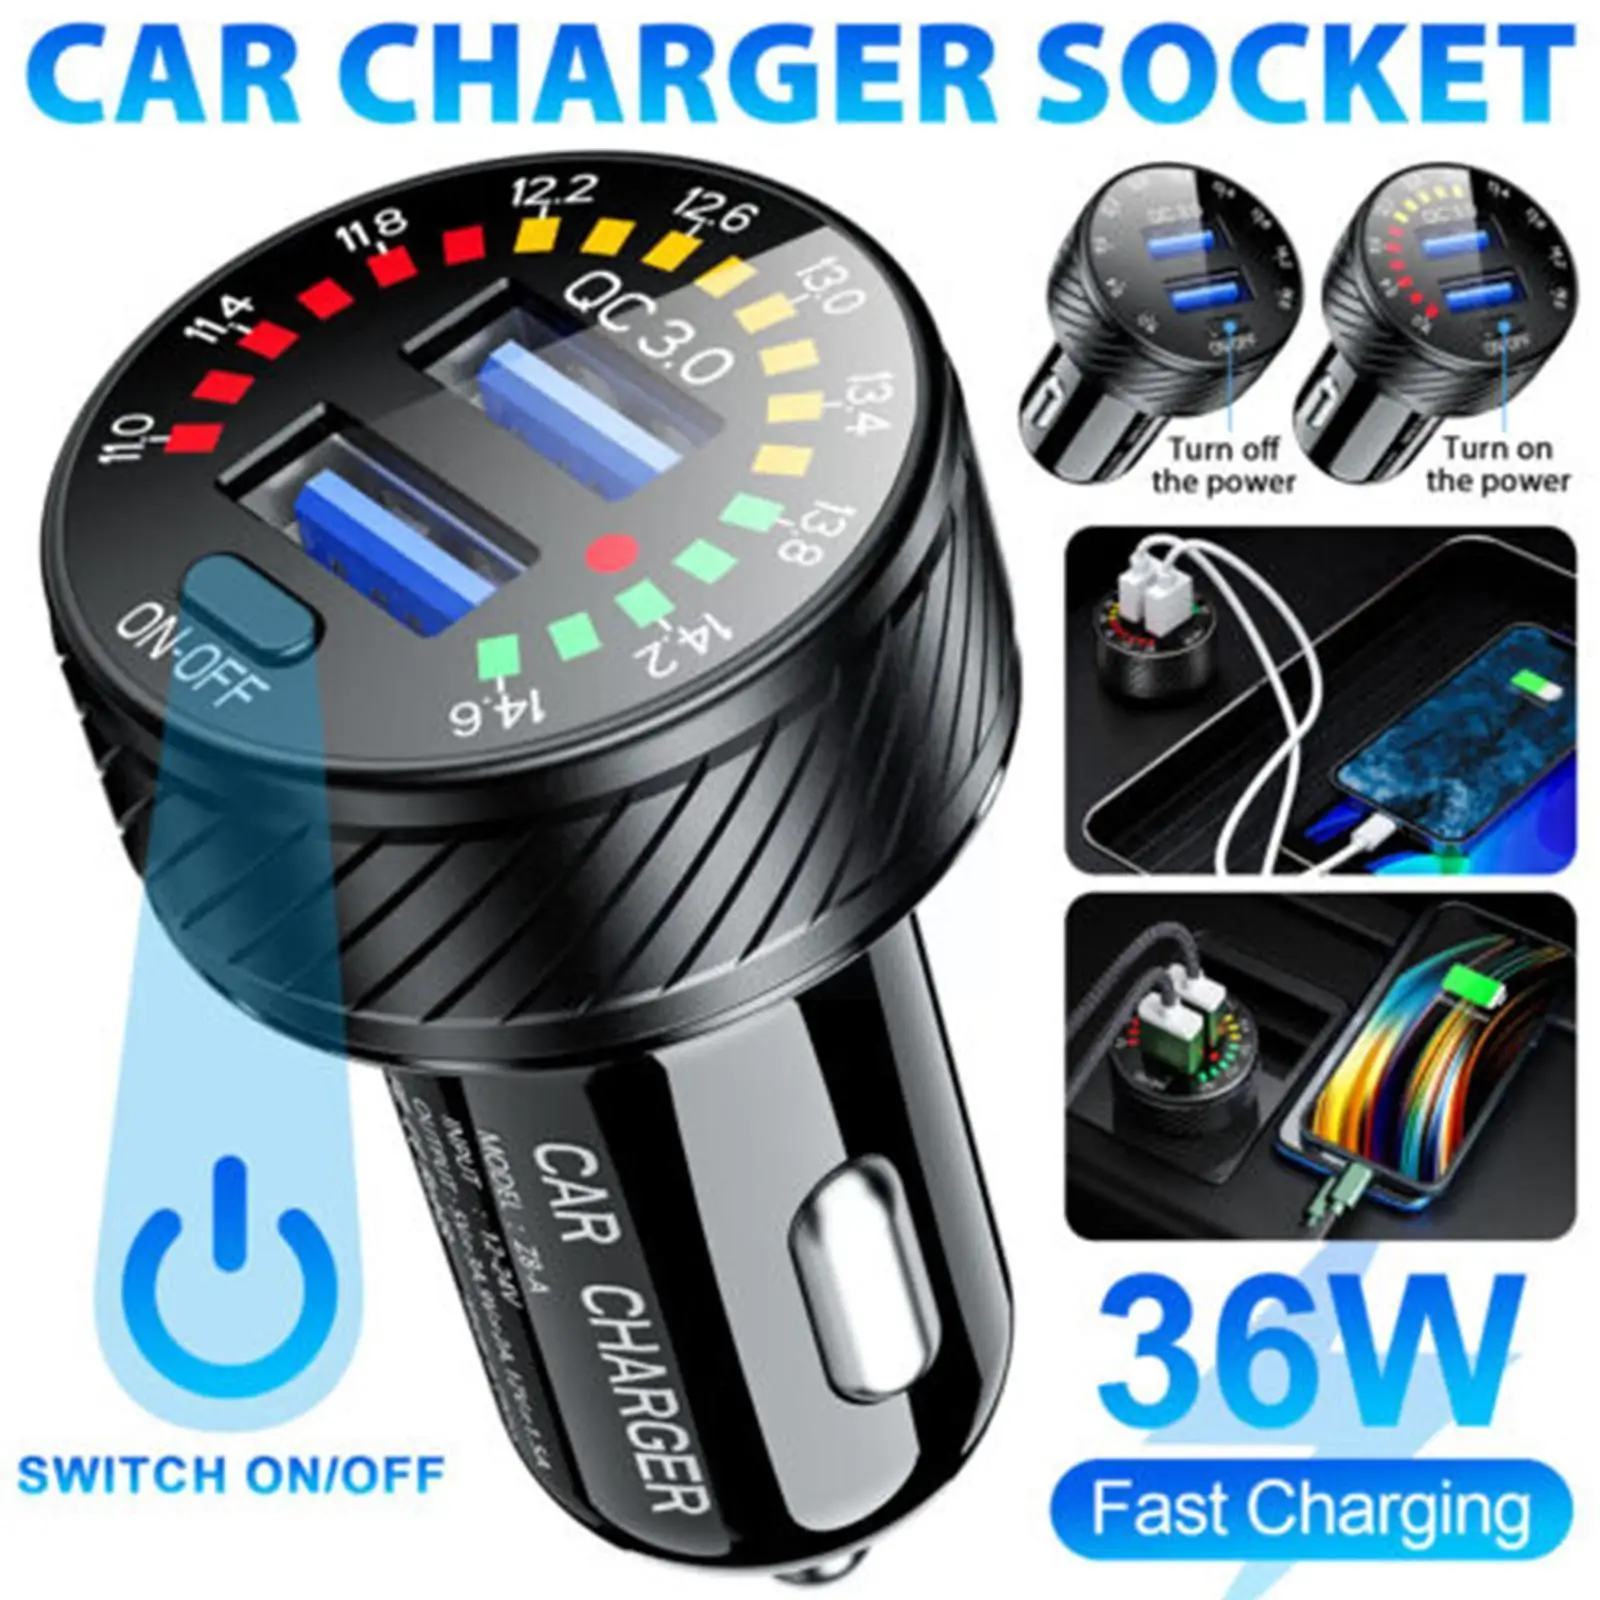 

36w Usb Car Charger Dual Qc3.0 Quick Charge Cigarette Fast Mobile Adapter Voltmeter Tablet With Charge Phone Lighter Compat N8j1